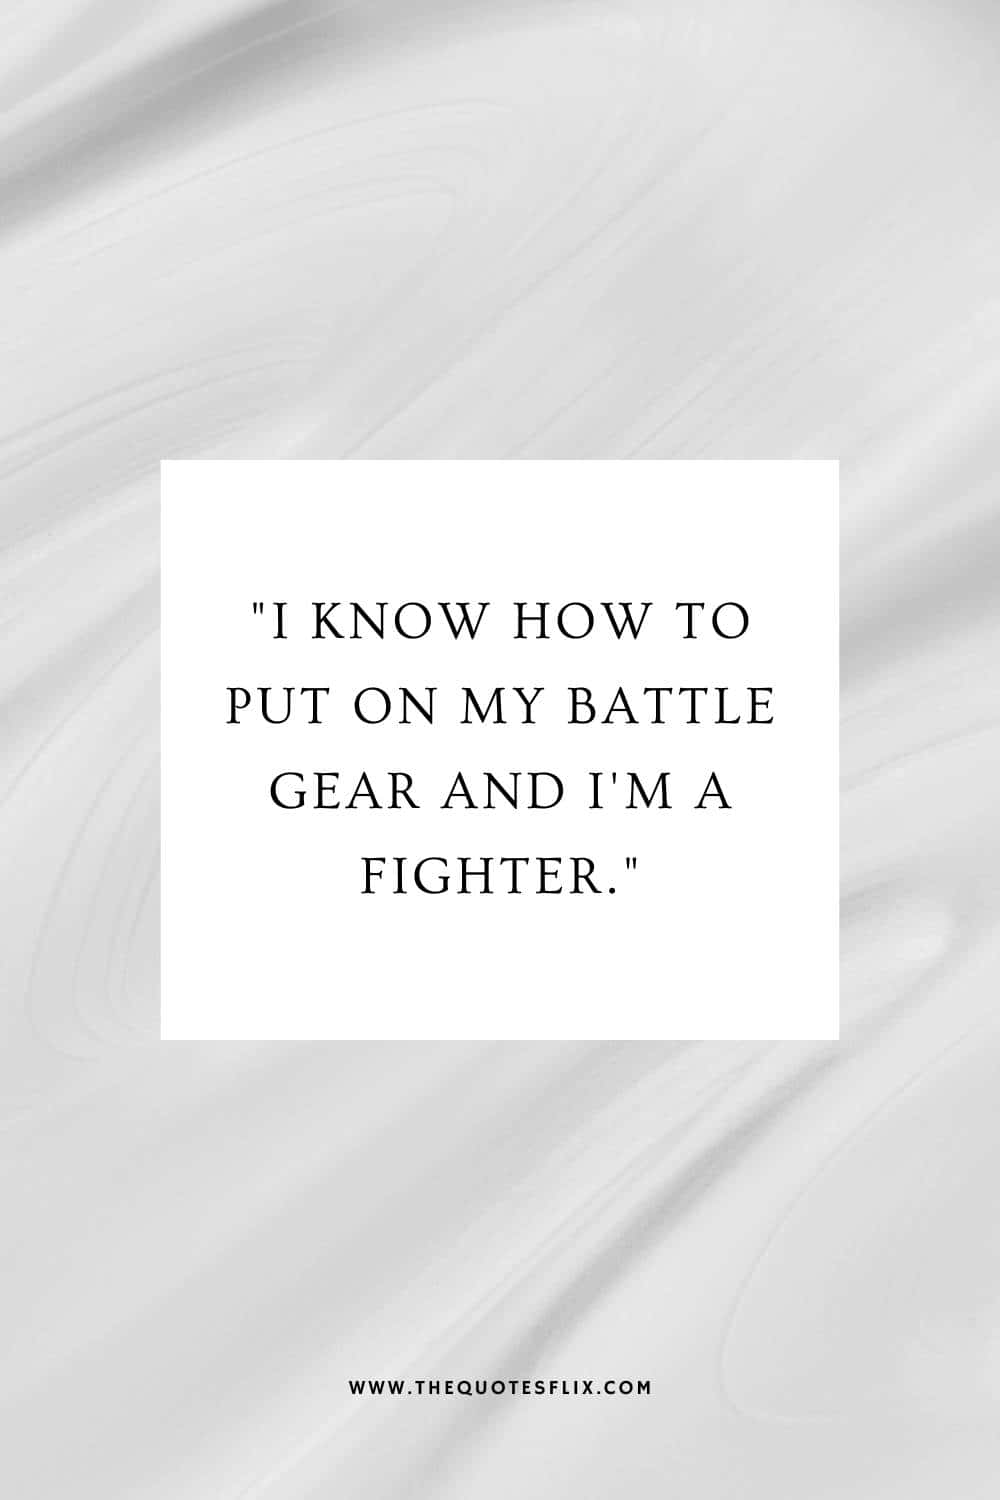 short cancer quotes - how to put battle gear fighter